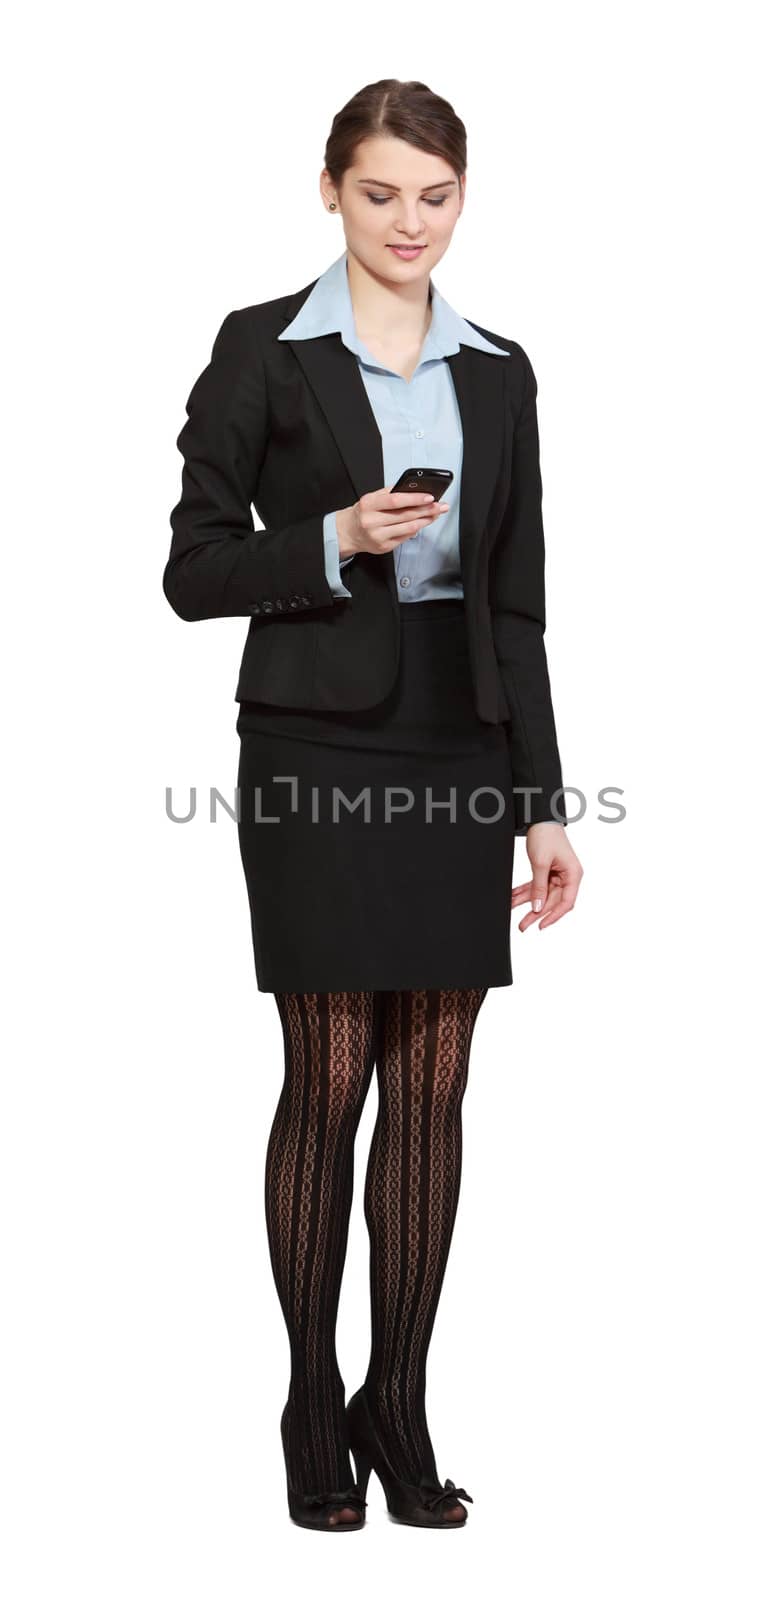 Young businesswoman checking her mobile phone, isolated against a white background.